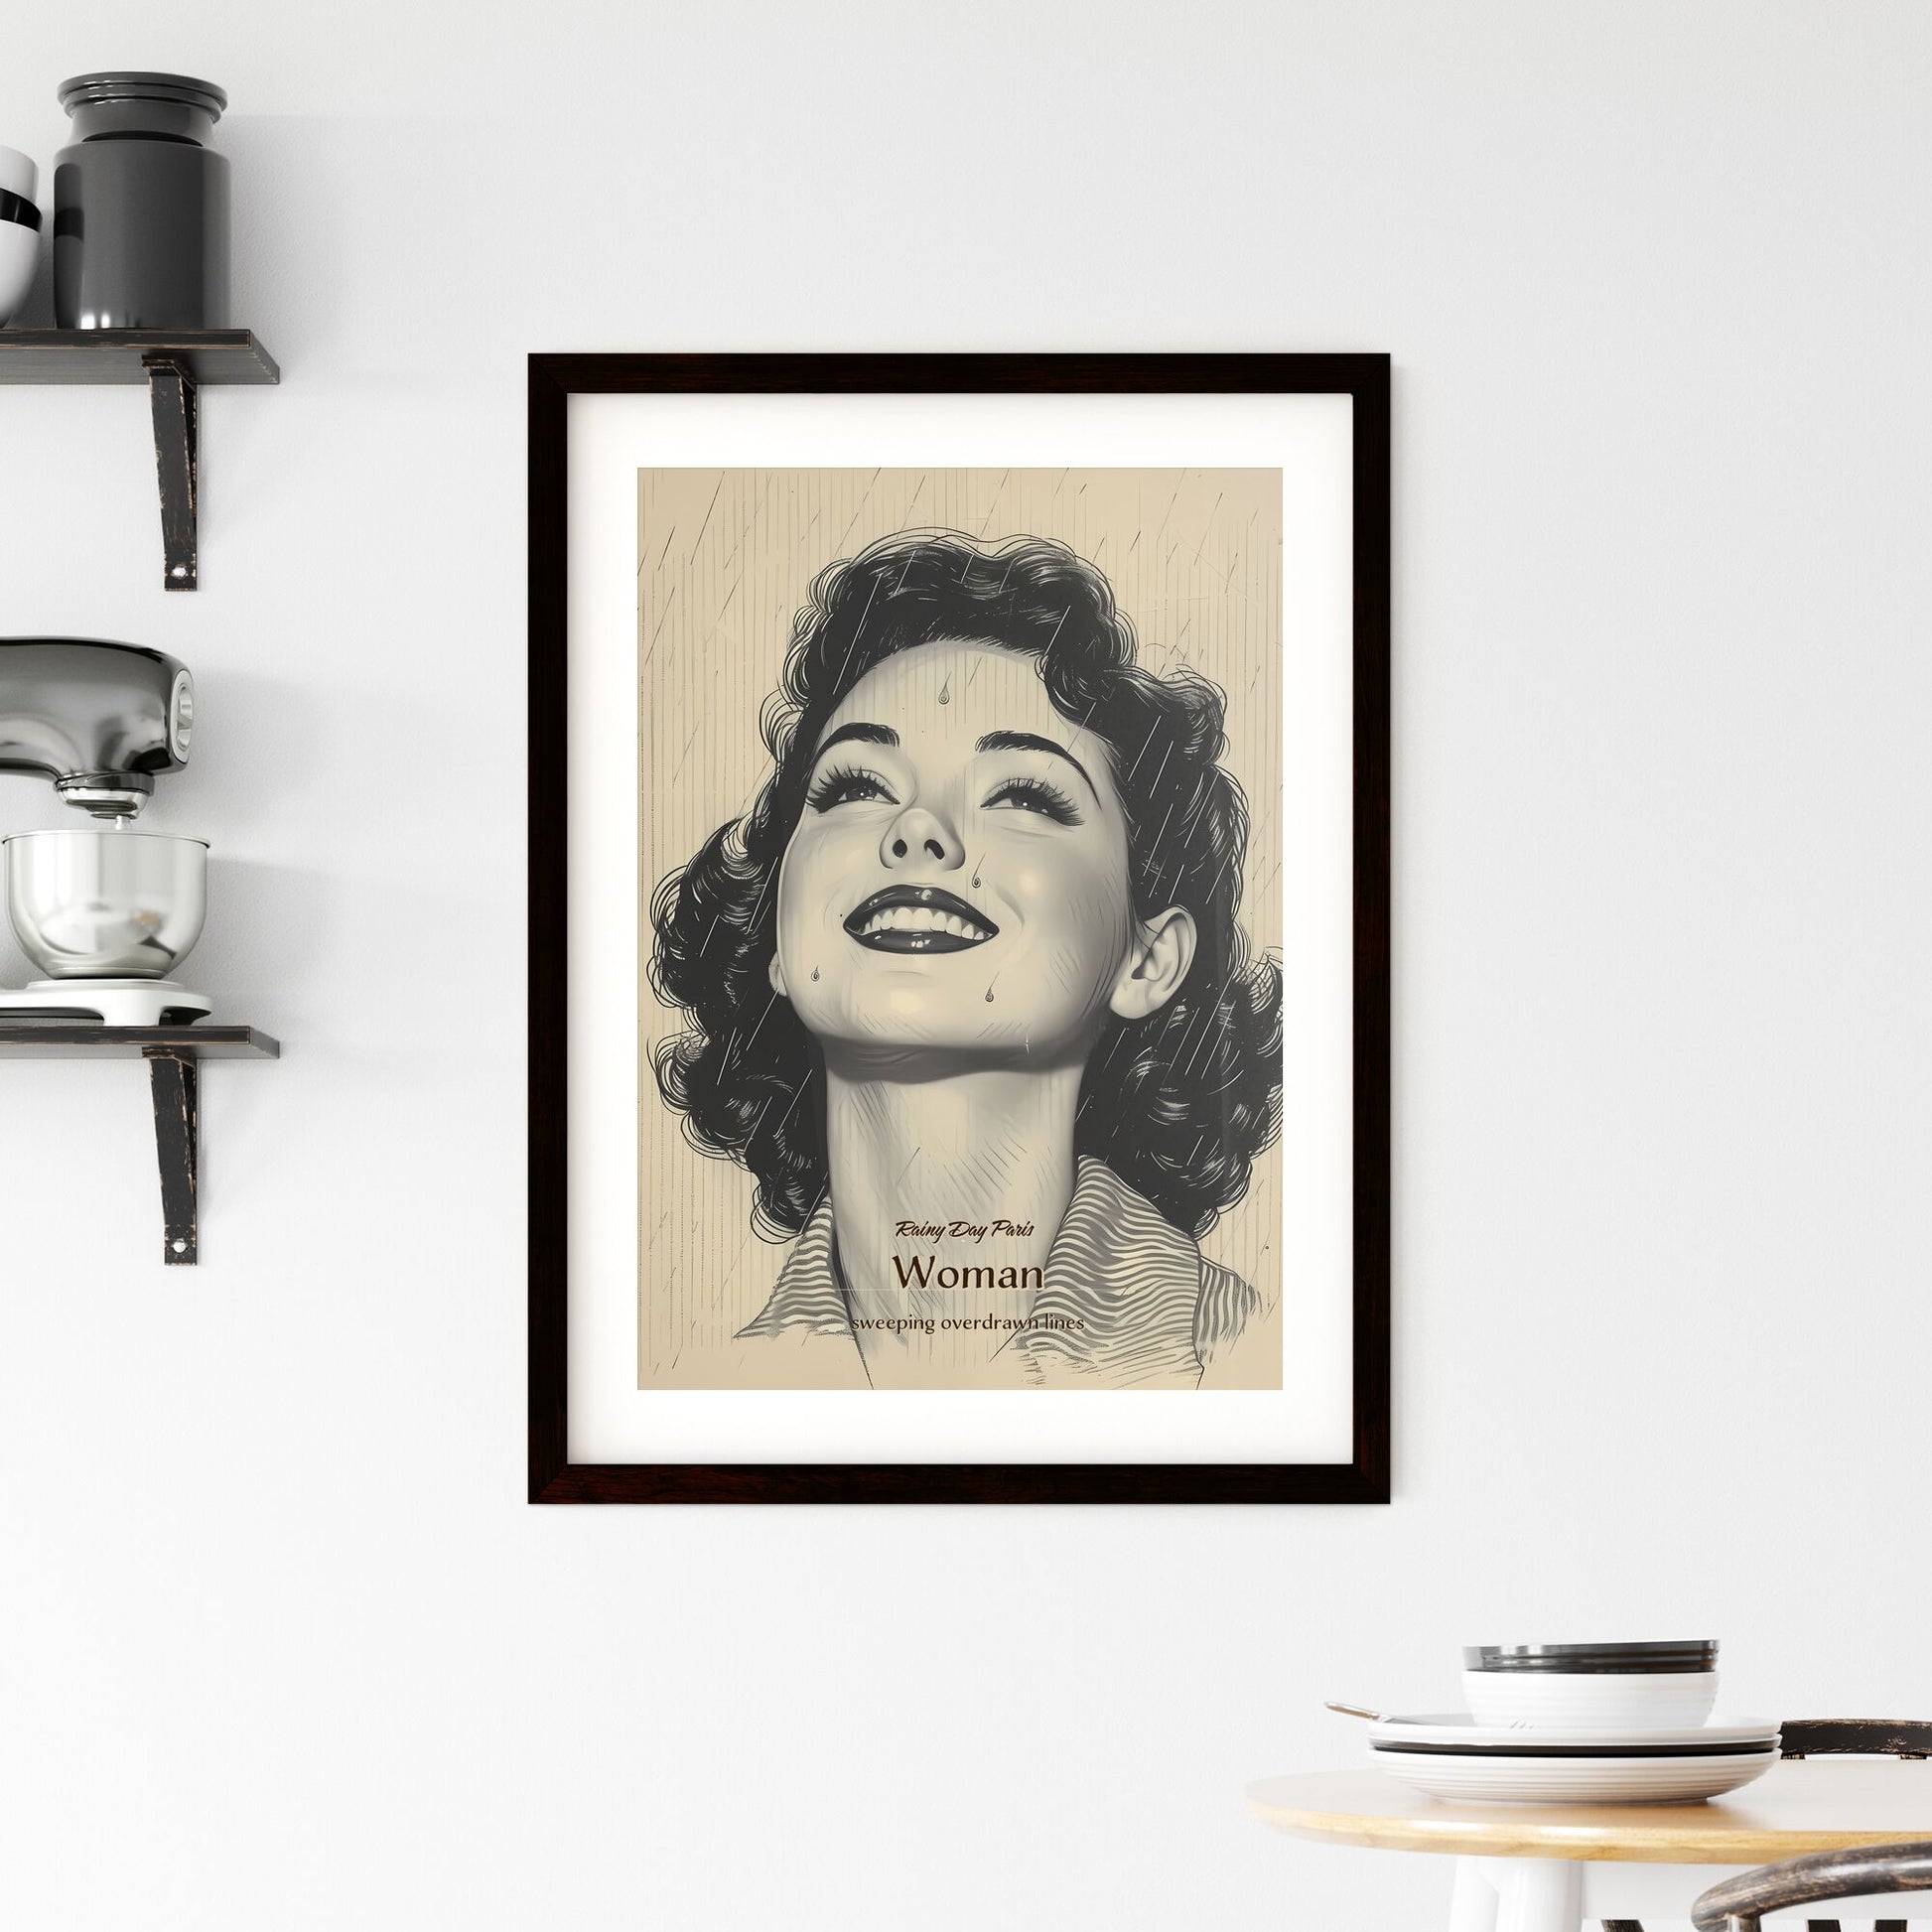 Rainy Day Paris, Woman, sweeping overdrawn lines, A Poster of a woman with short curly hair smiling Default Title